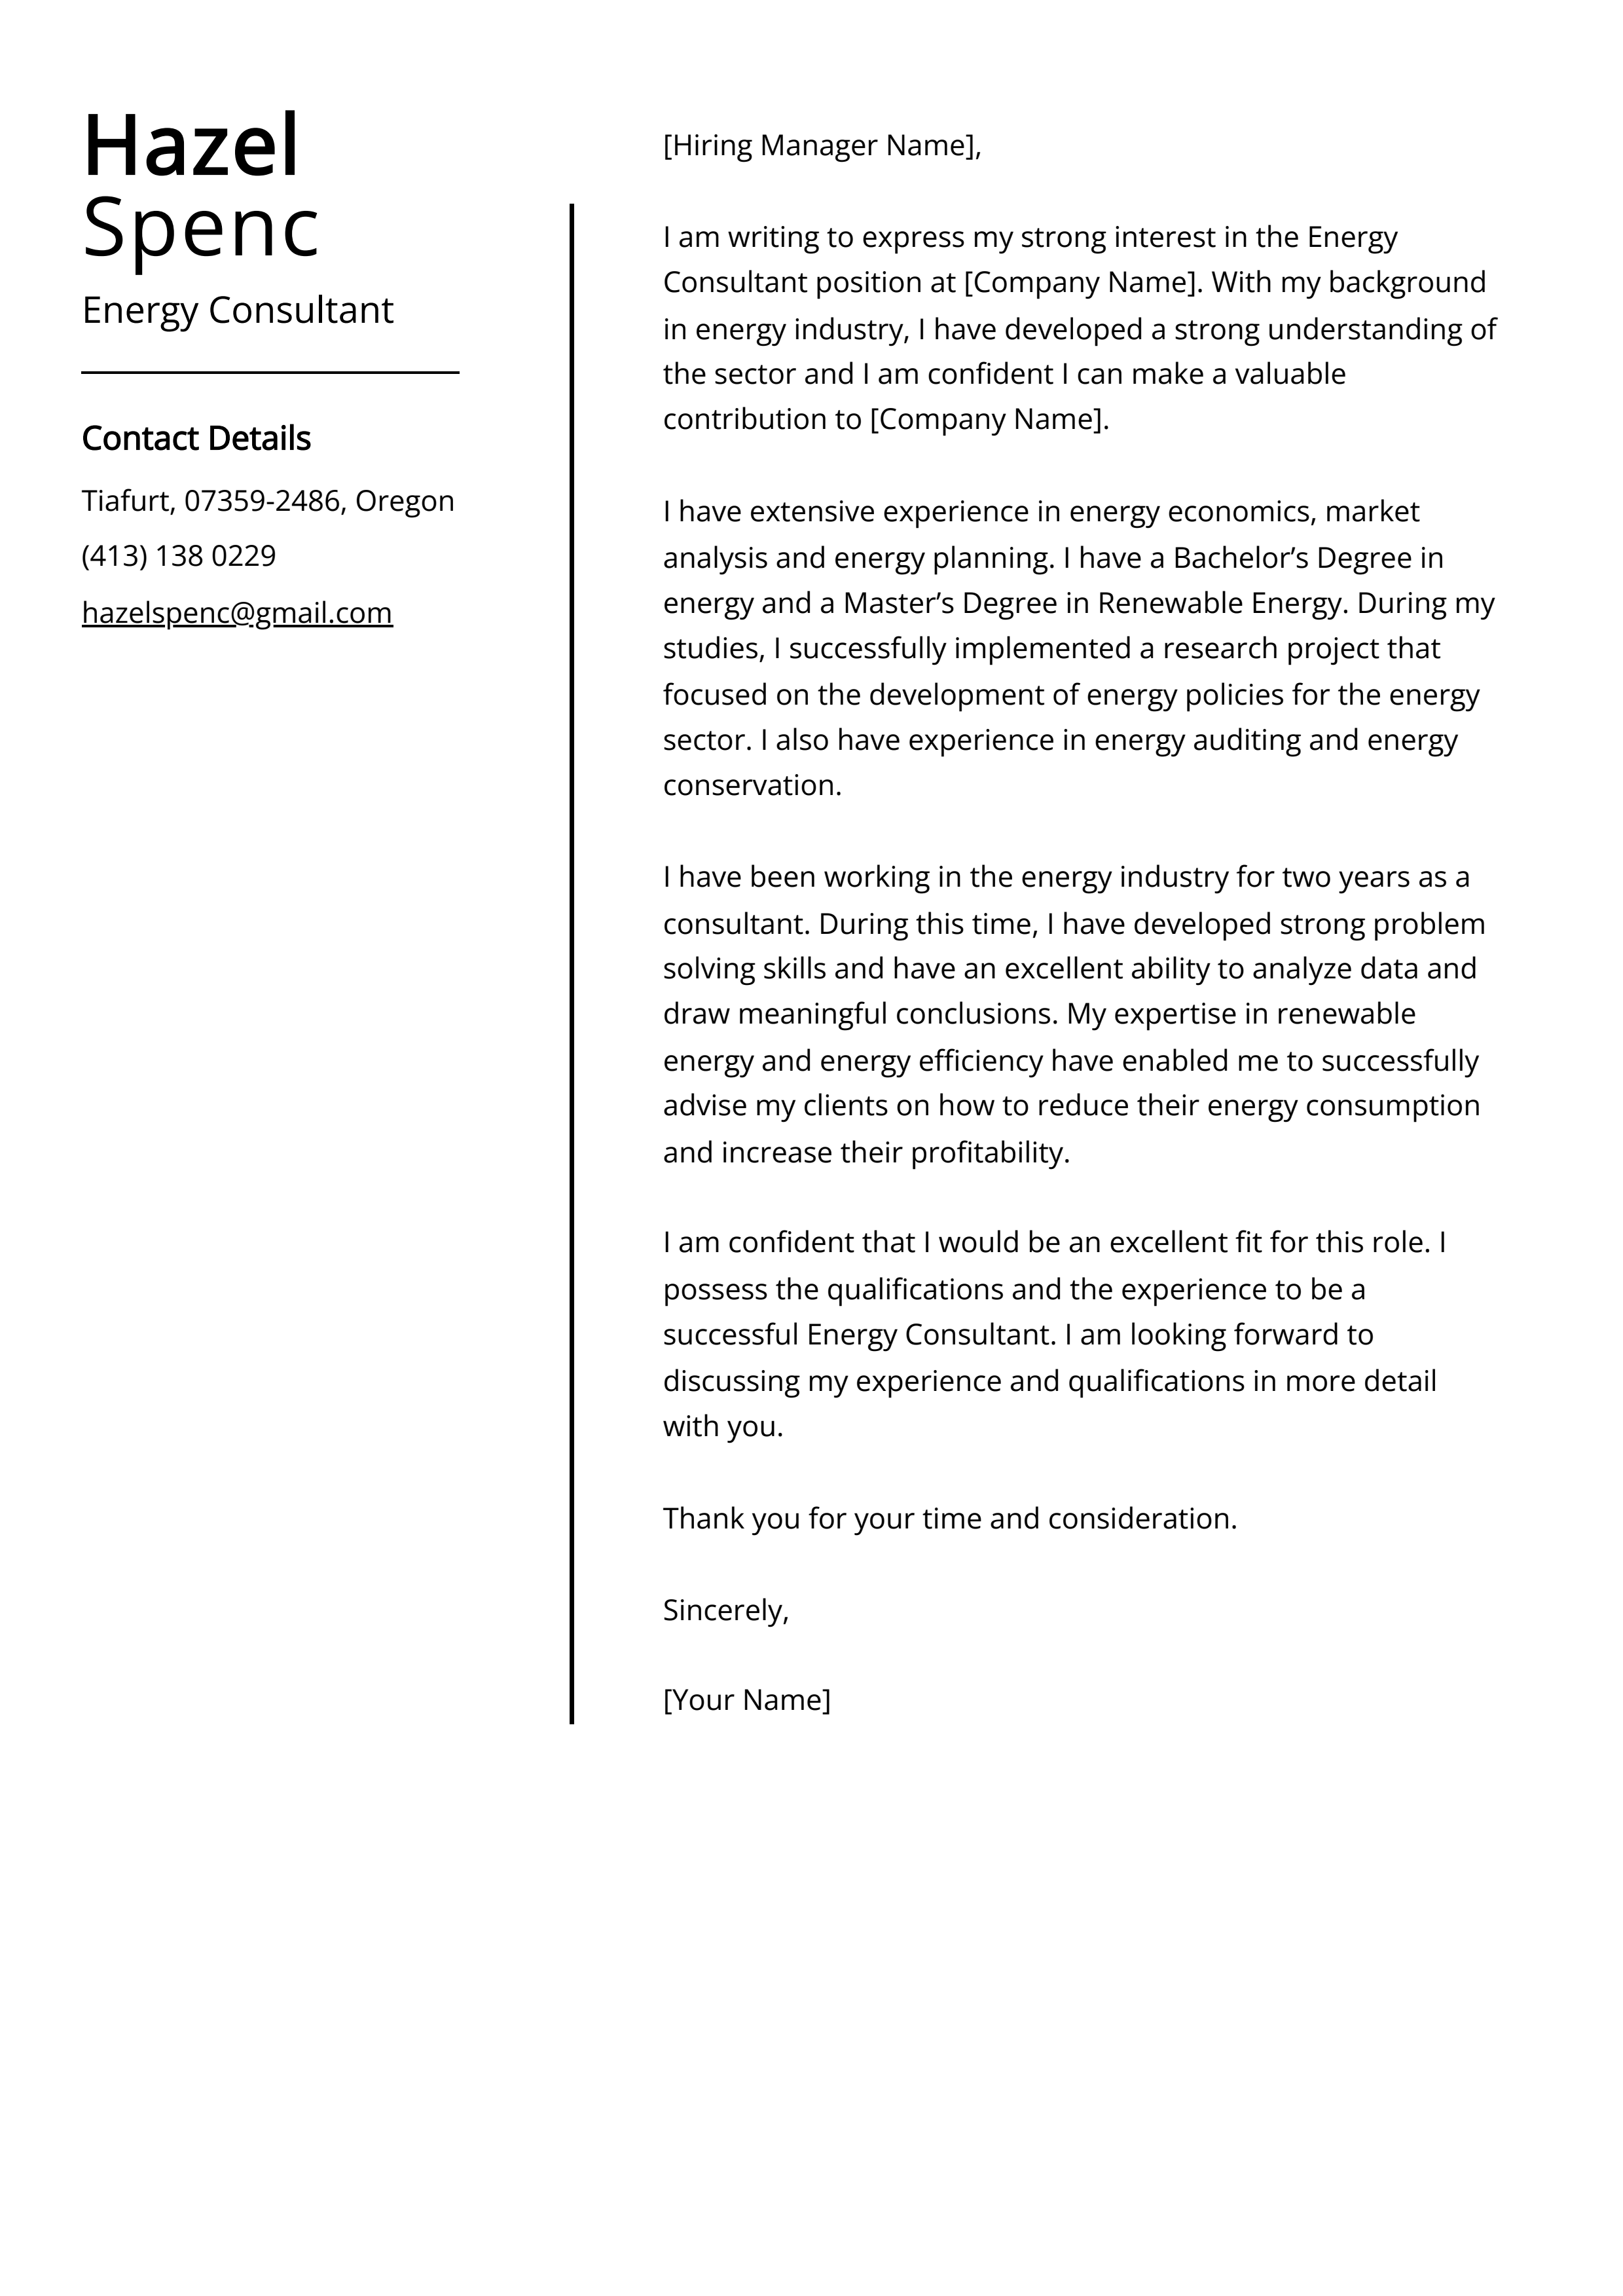 Energy Consultant Cover Letter Example